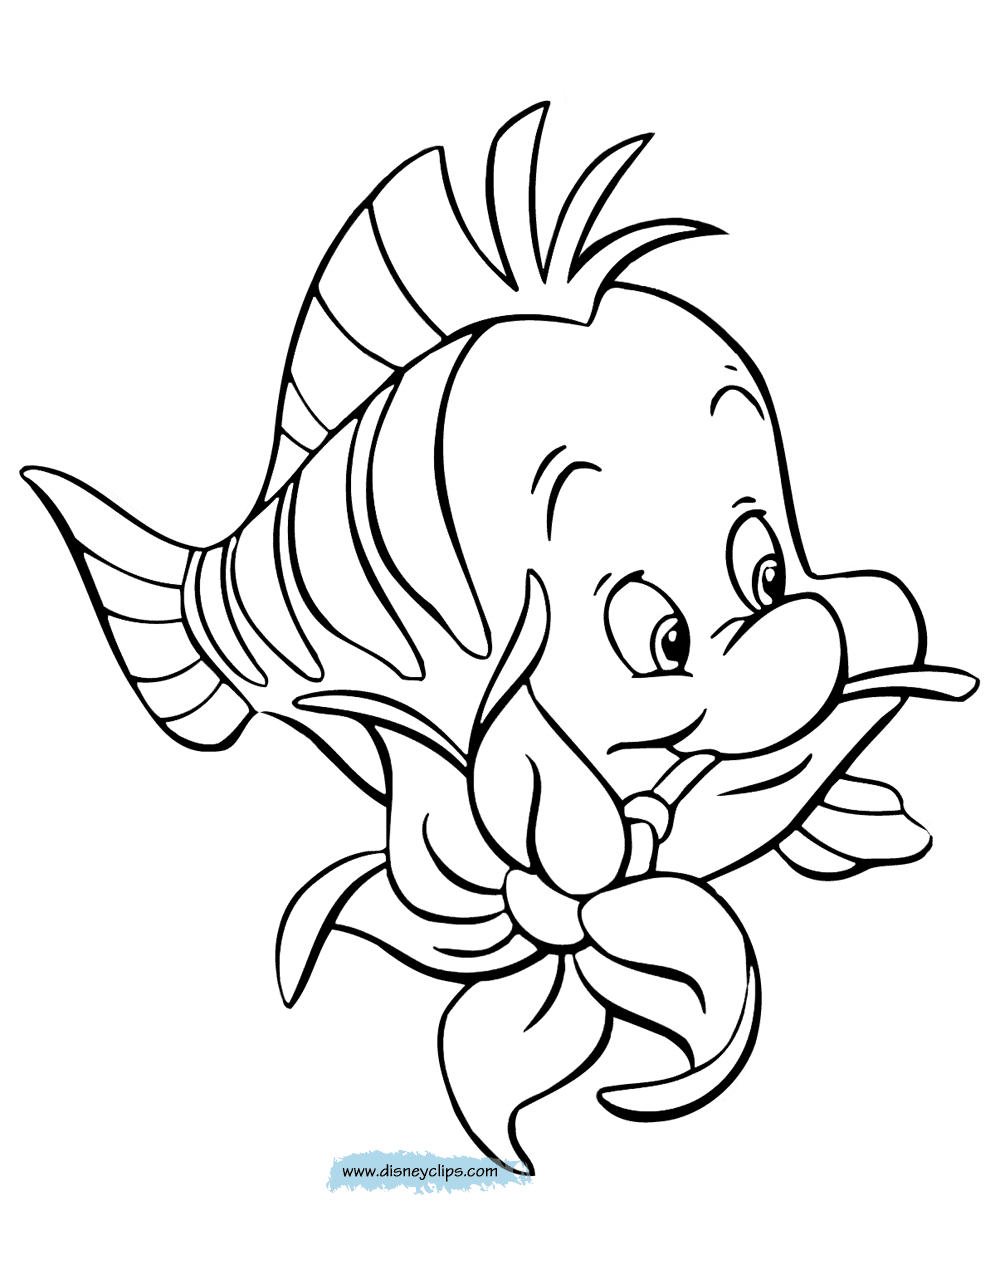 Coloring Pages Of Little Mermaid 152 Unbeatable Coloring Pages Little Mermaid Ariel 2 Ardesengsk